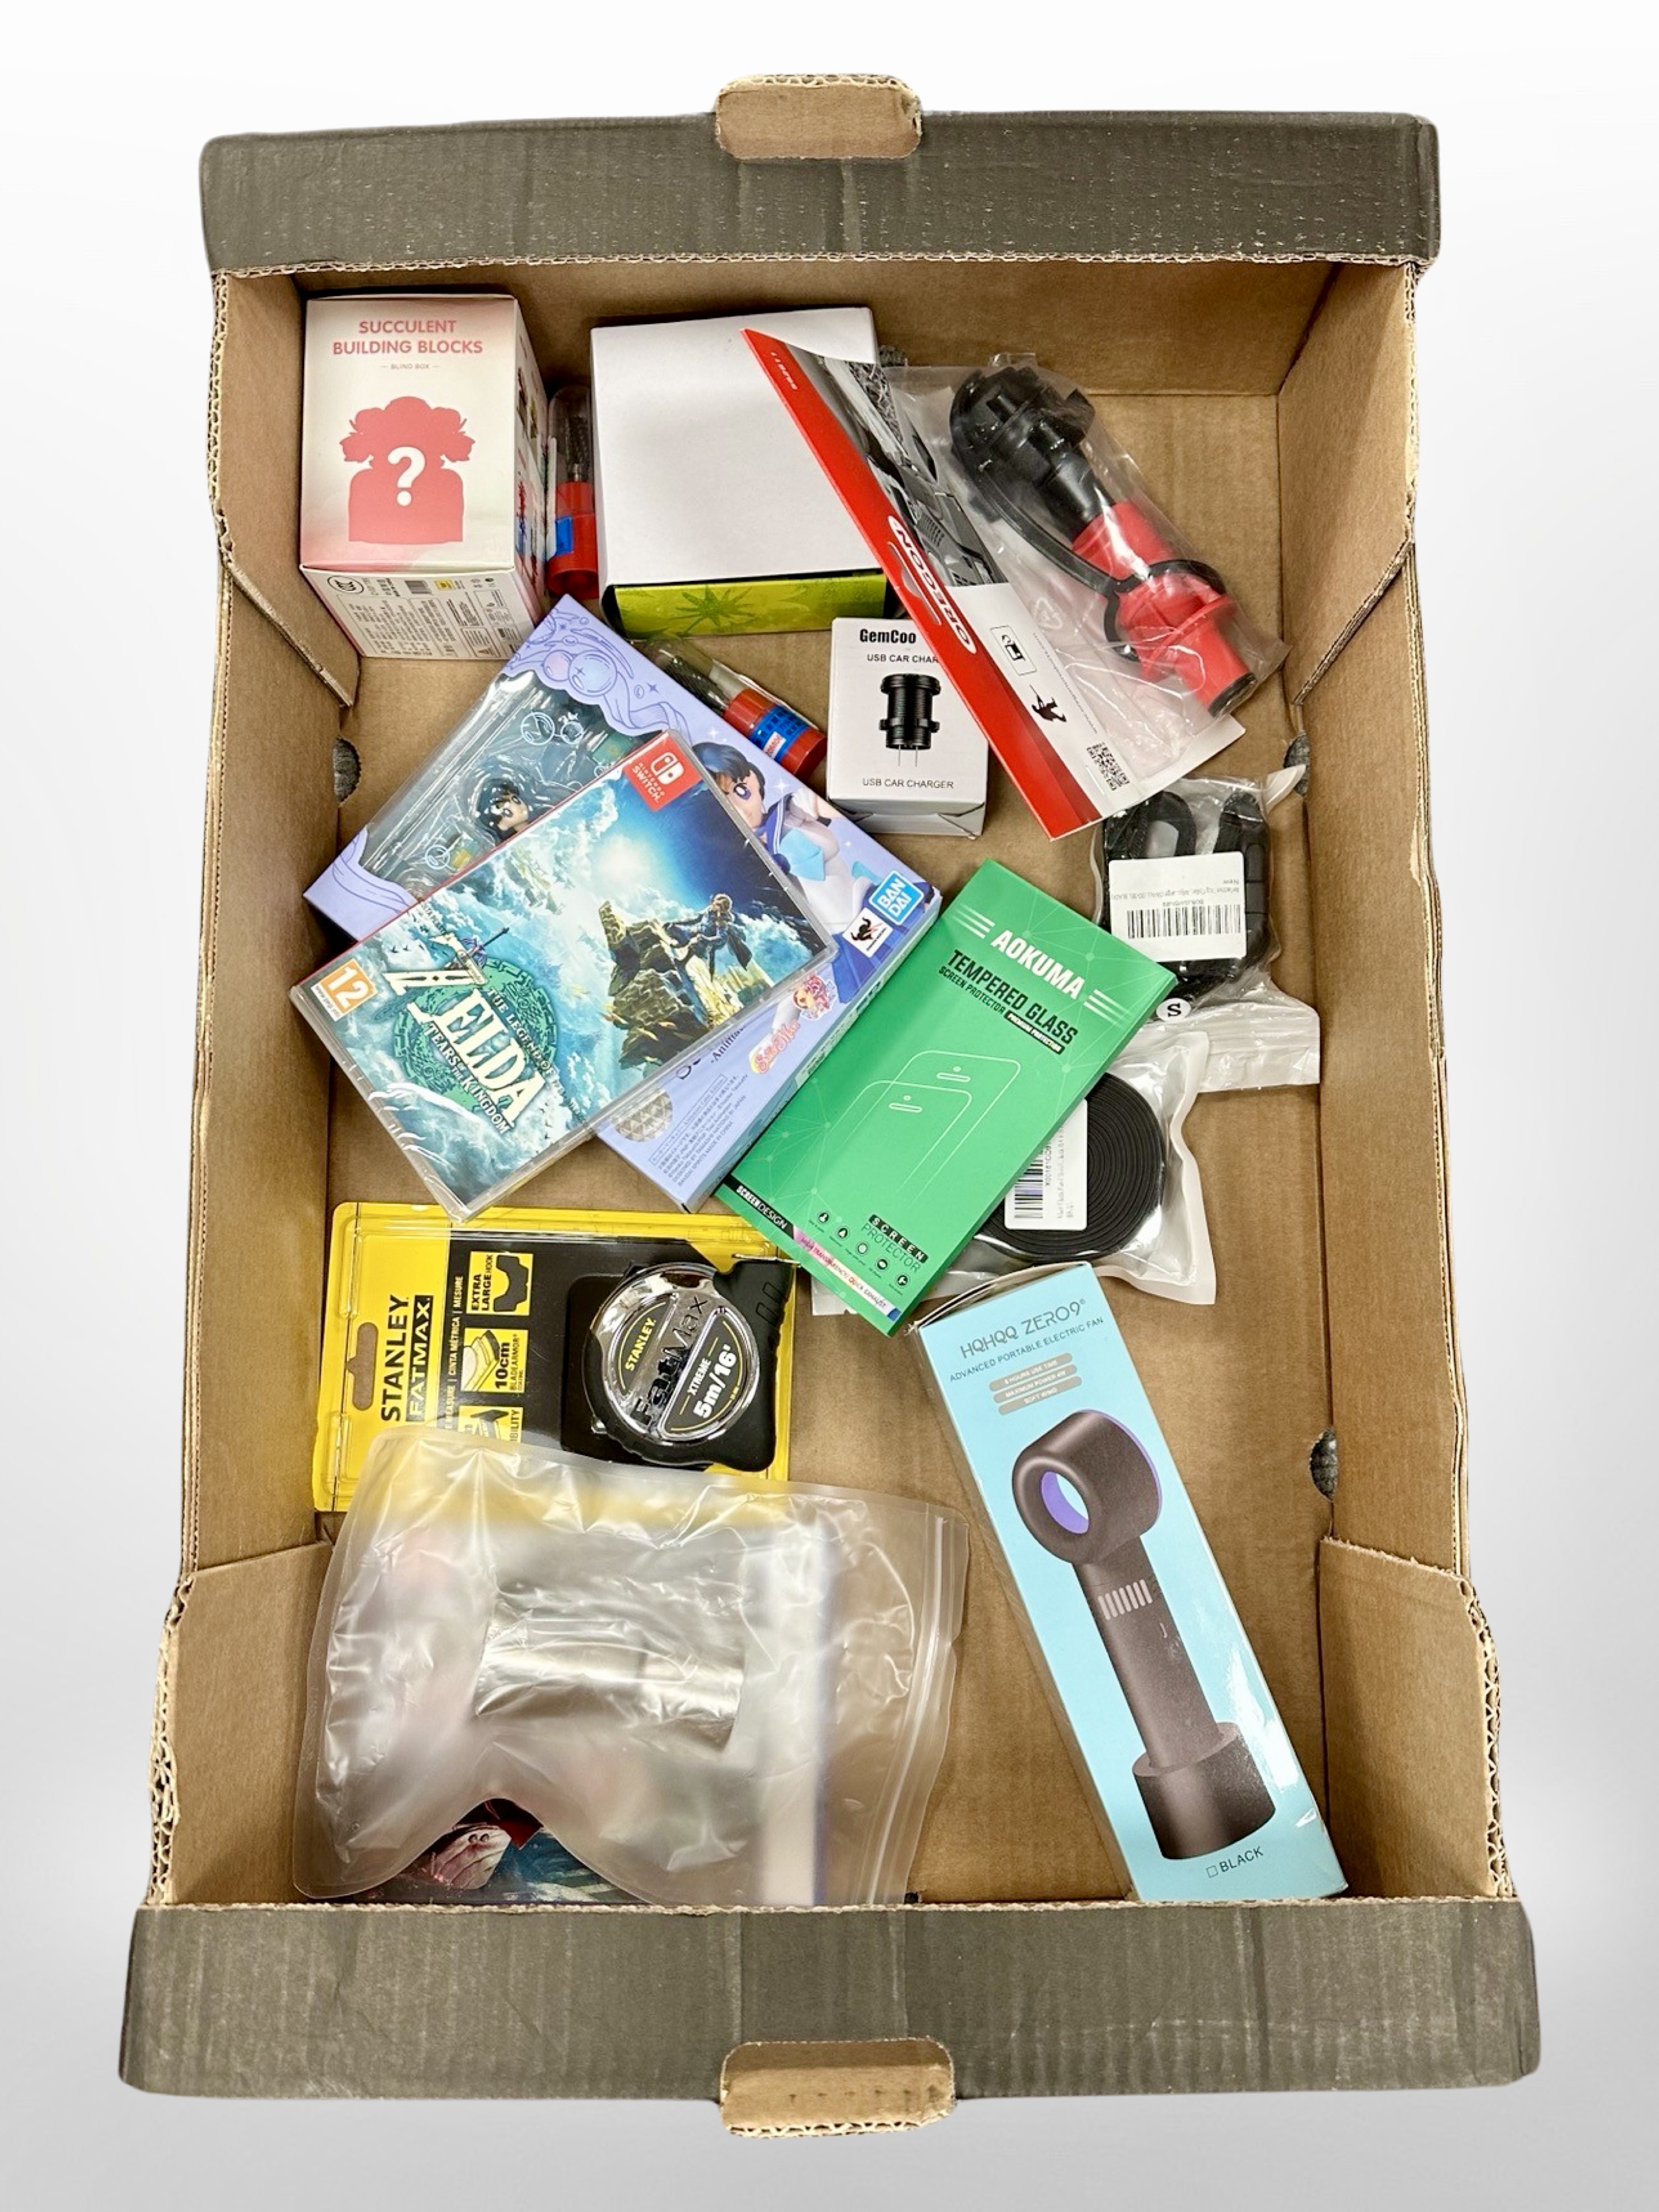 A box of new retail stock items - tape measure, Nintendo Switch game, PS5 game,